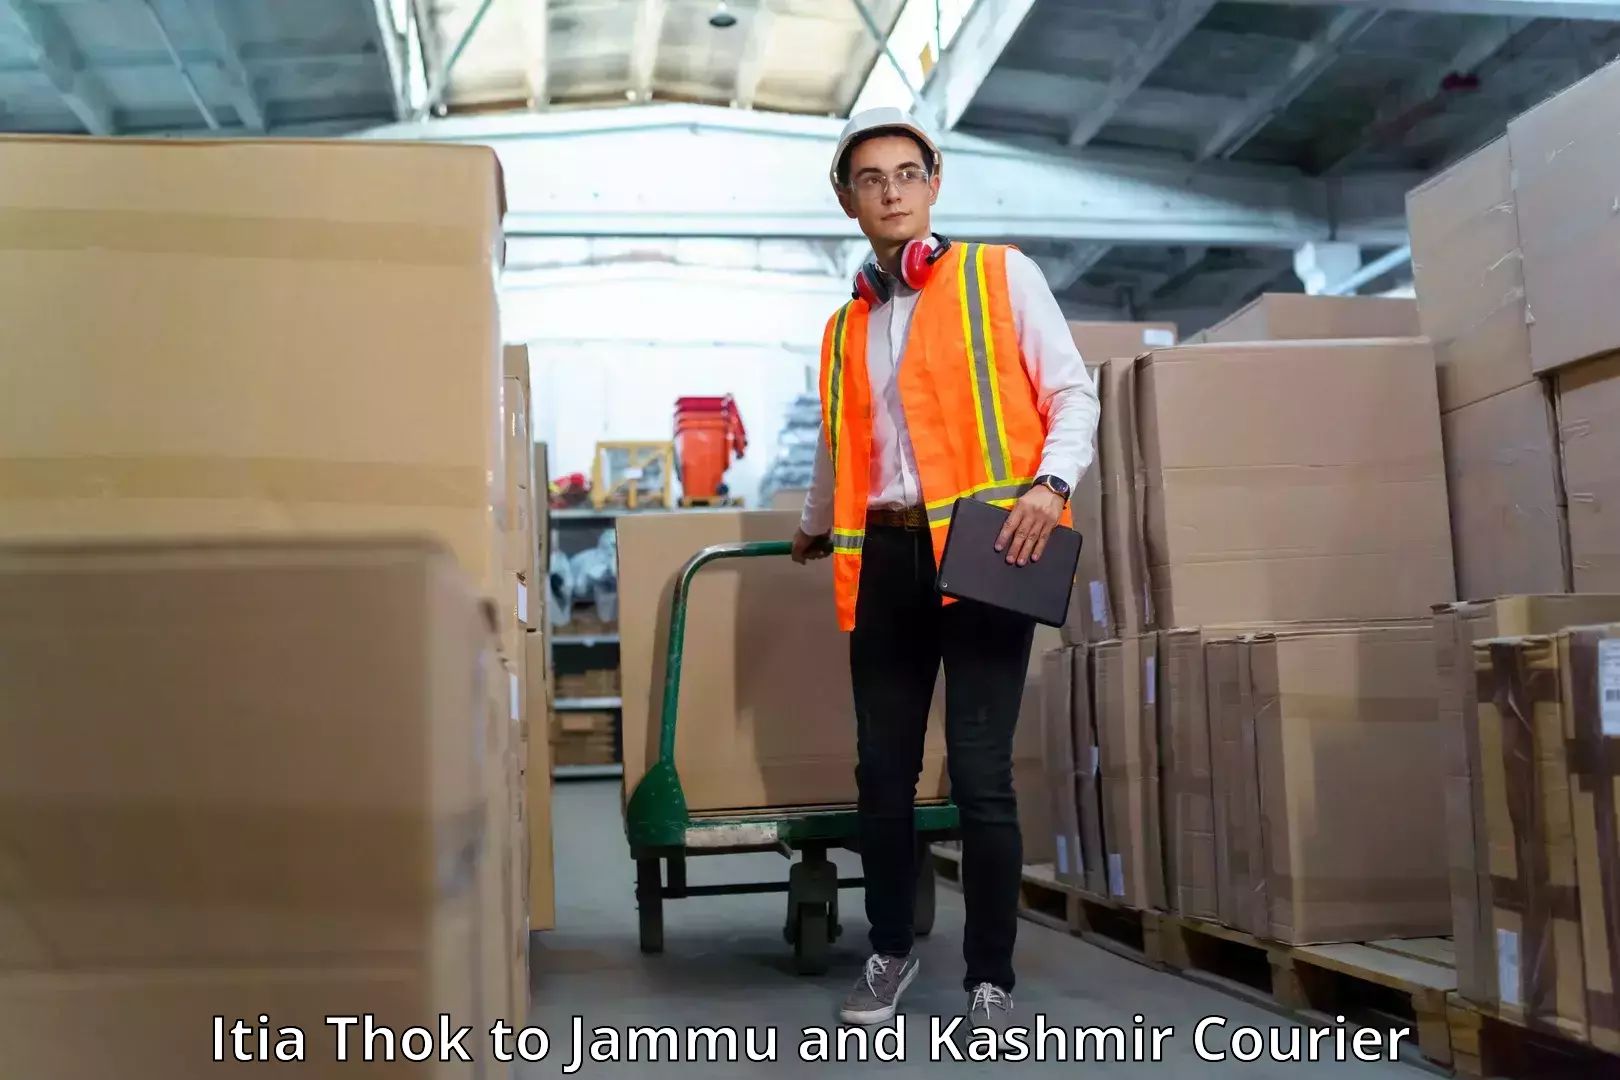 Express delivery network Itia Thok to Jammu and Kashmir